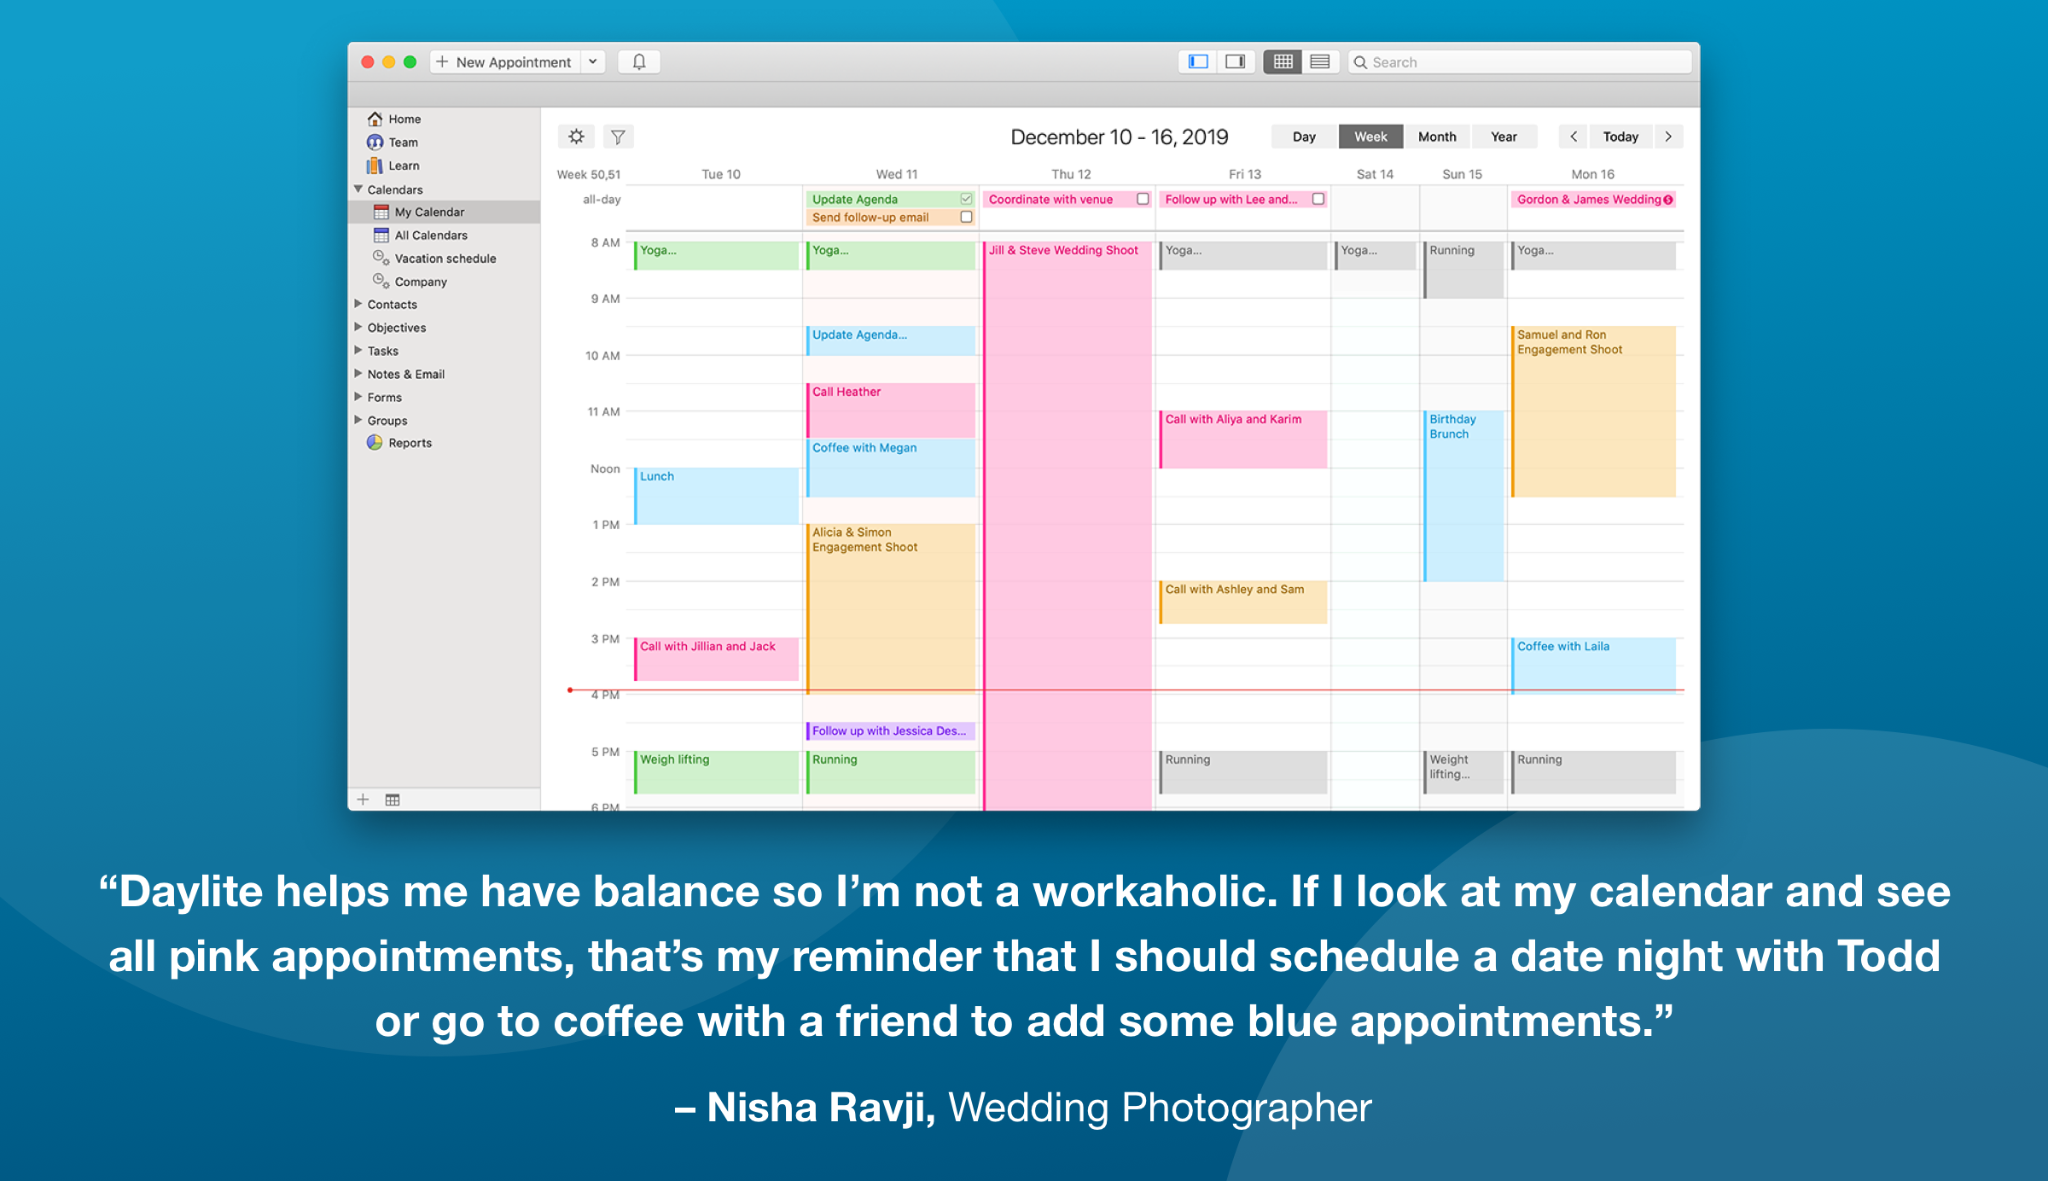 Screenshot of Daylite Calendar shows a customer's appointments and a short testimonial.